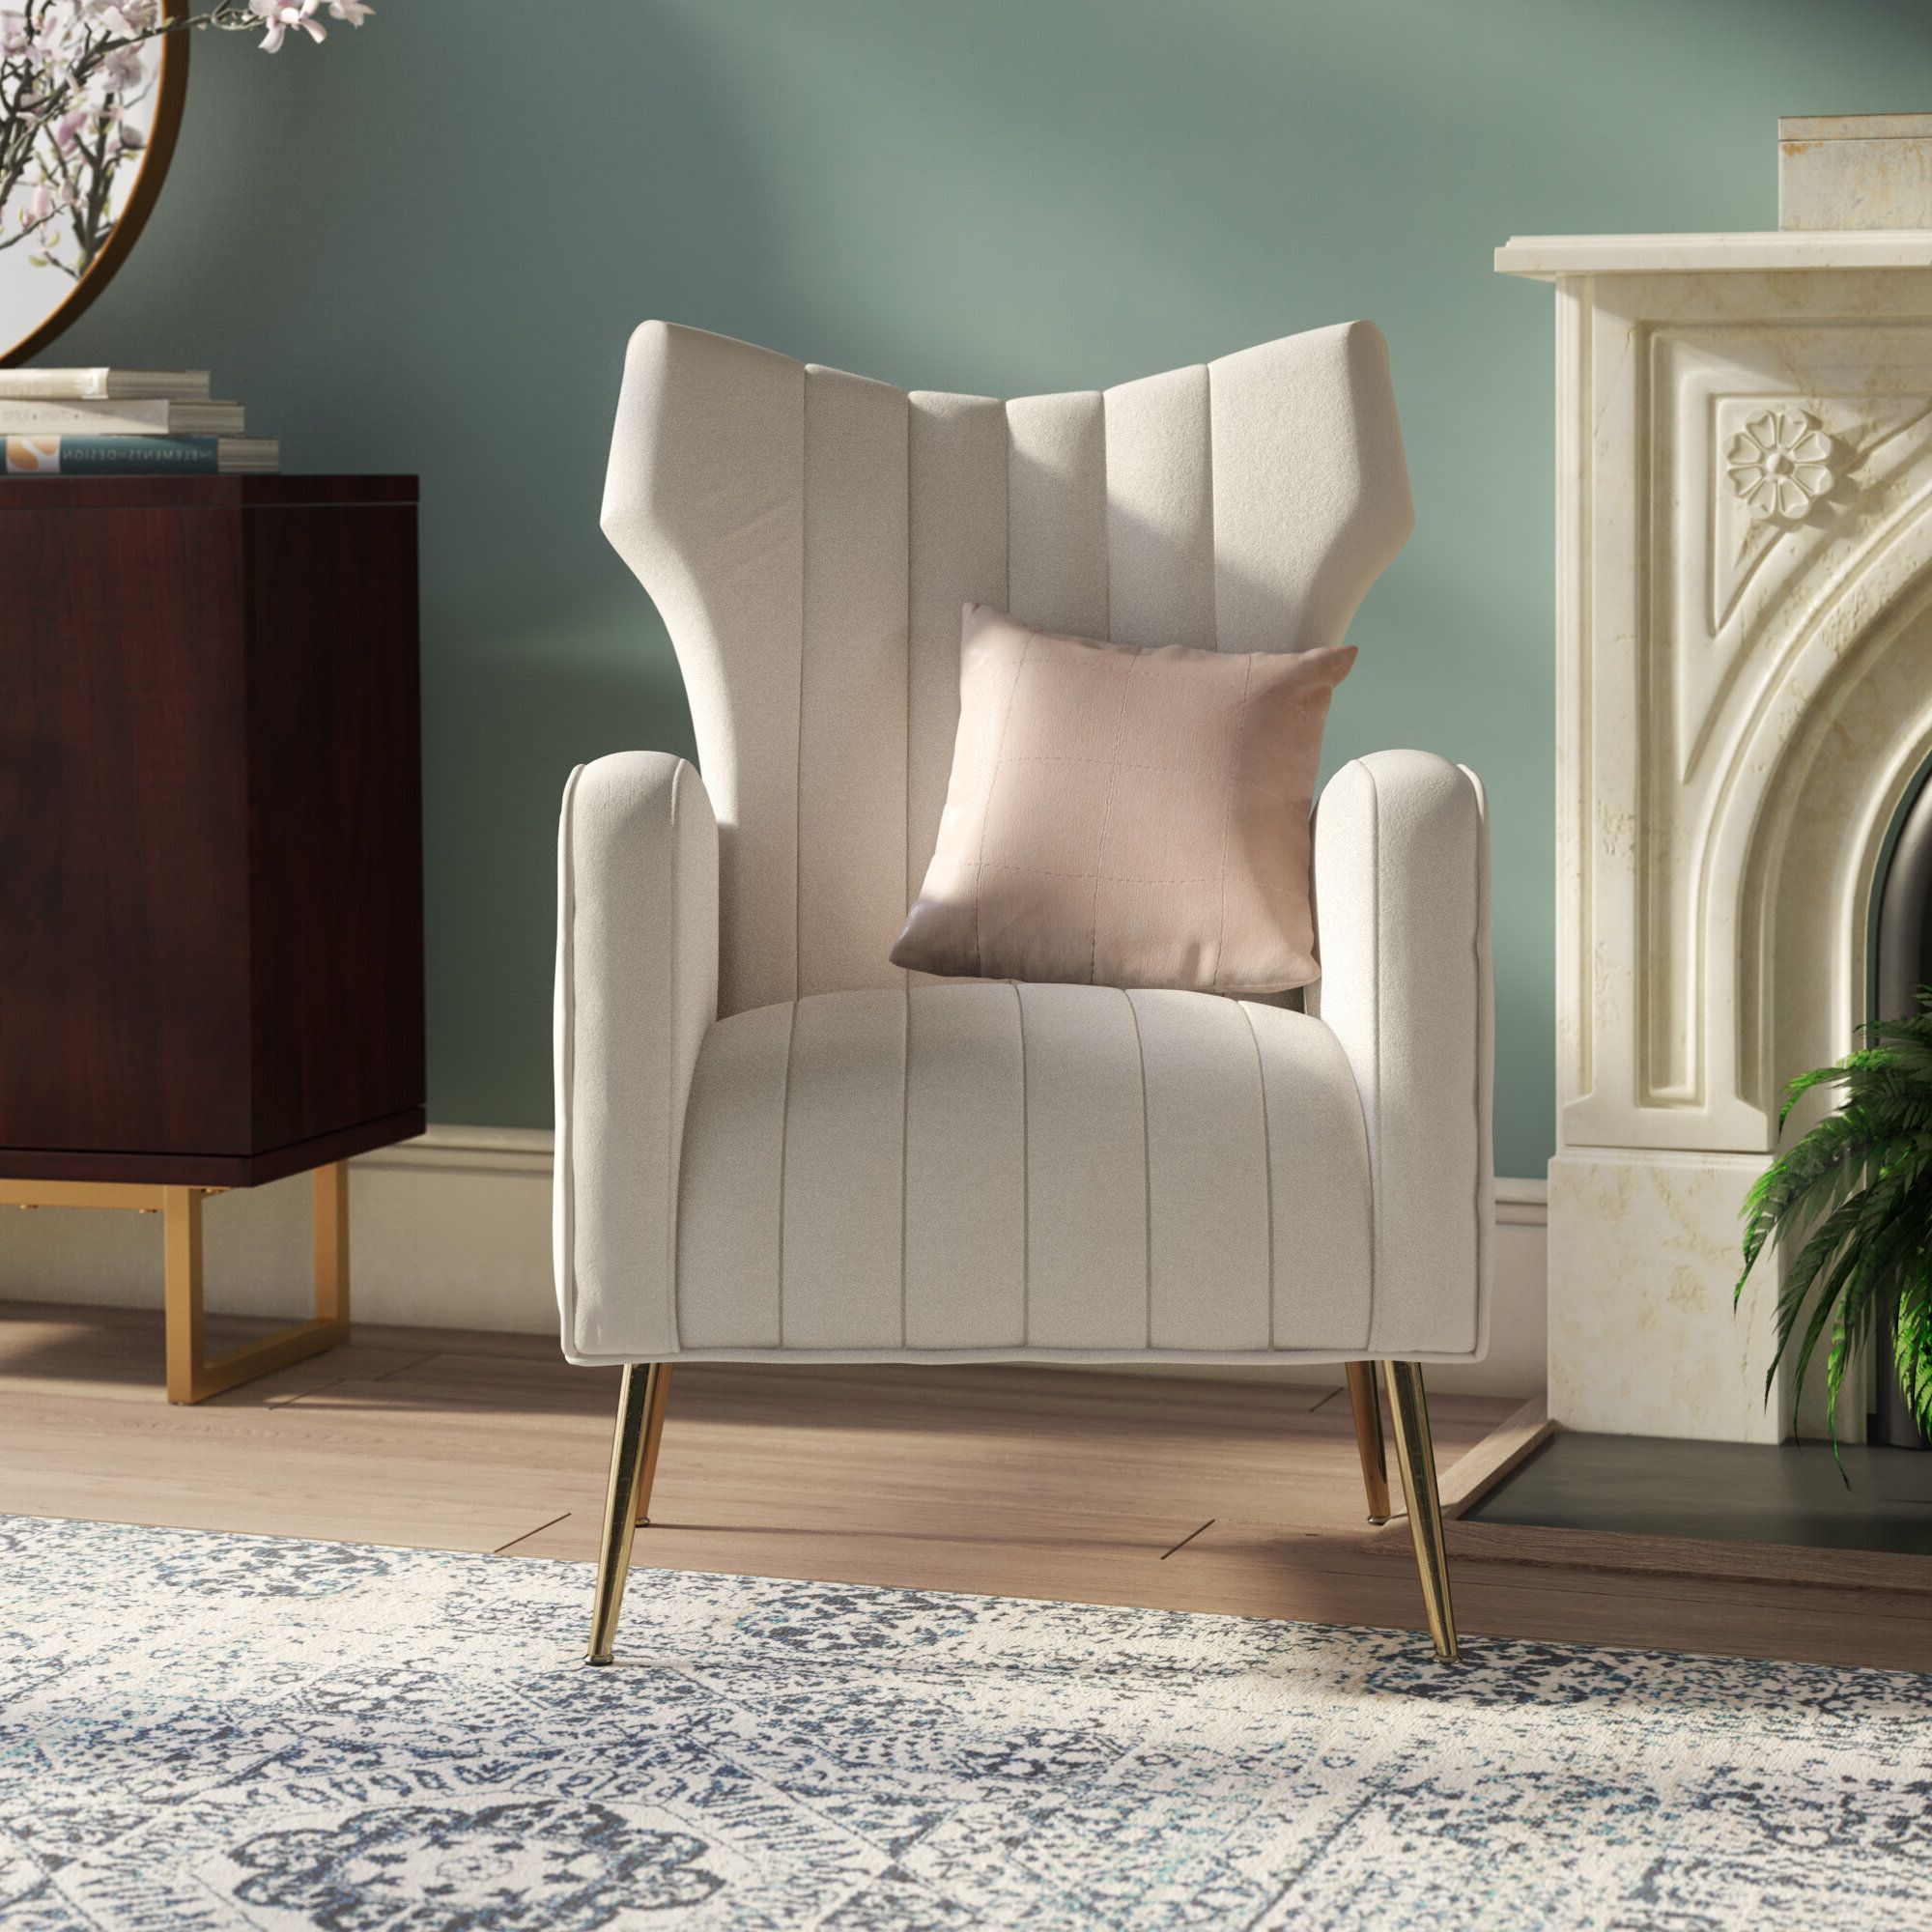 Widely Used Lauretta Velvet Wingback Chairs For Lauretta  (View 2 of 20)